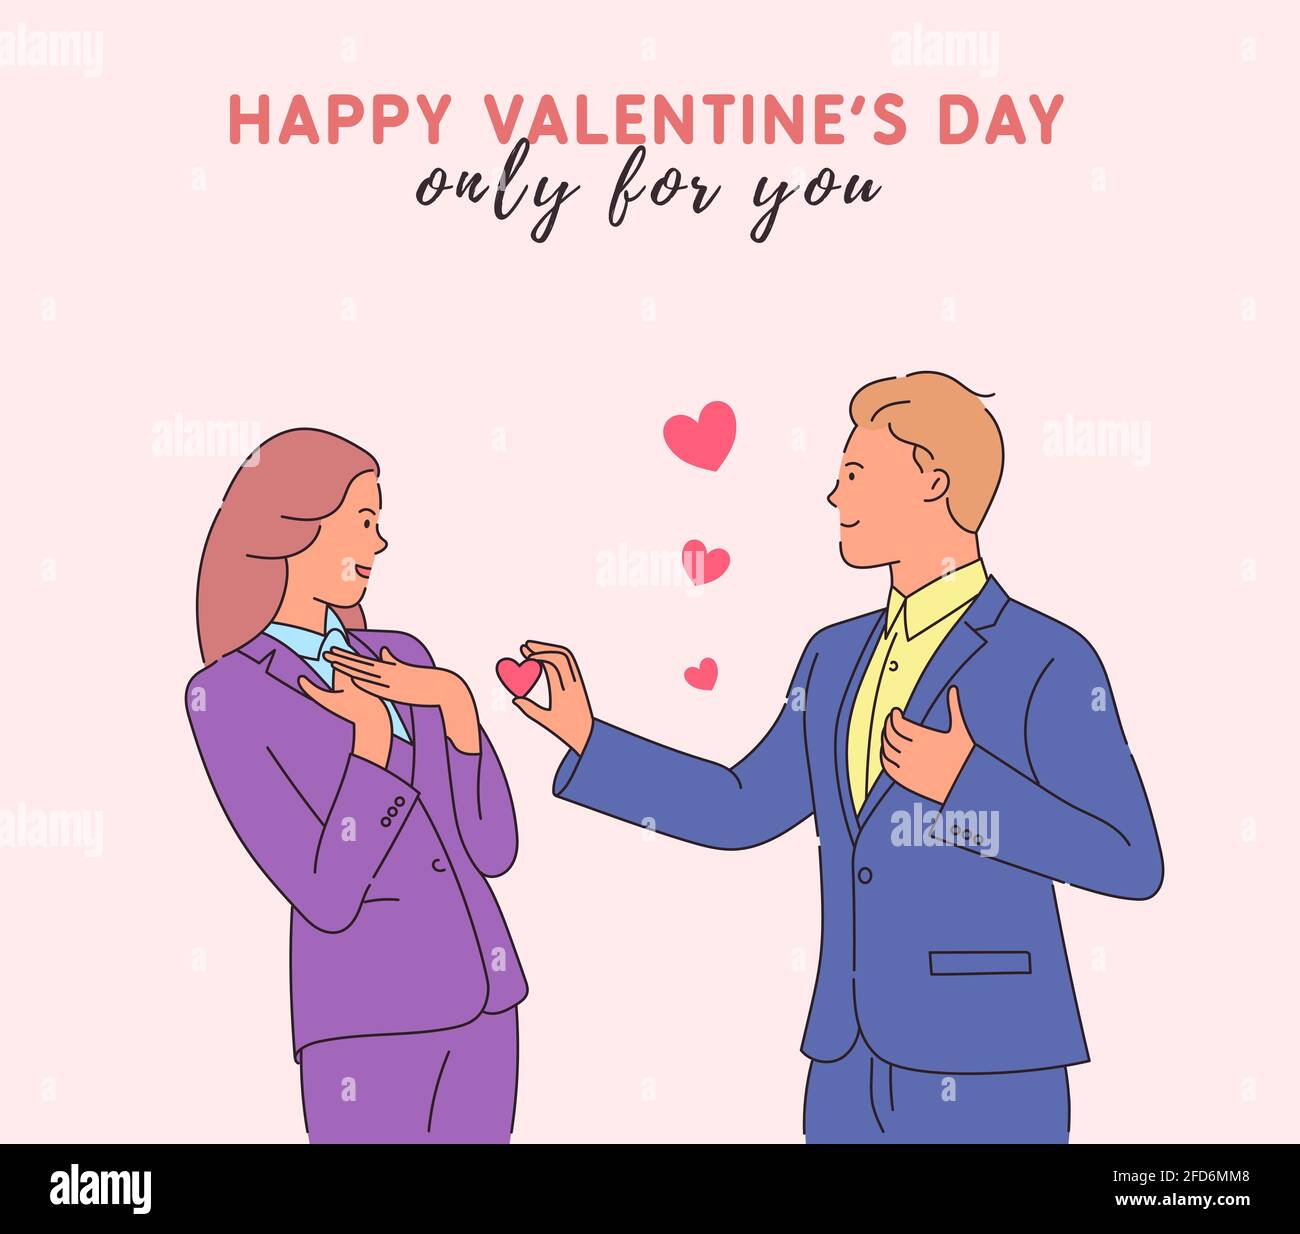 Love, valentines day concept. Young enamored man giving heart-shaped card to shocked woman. Modern line style illustration Stock Vector